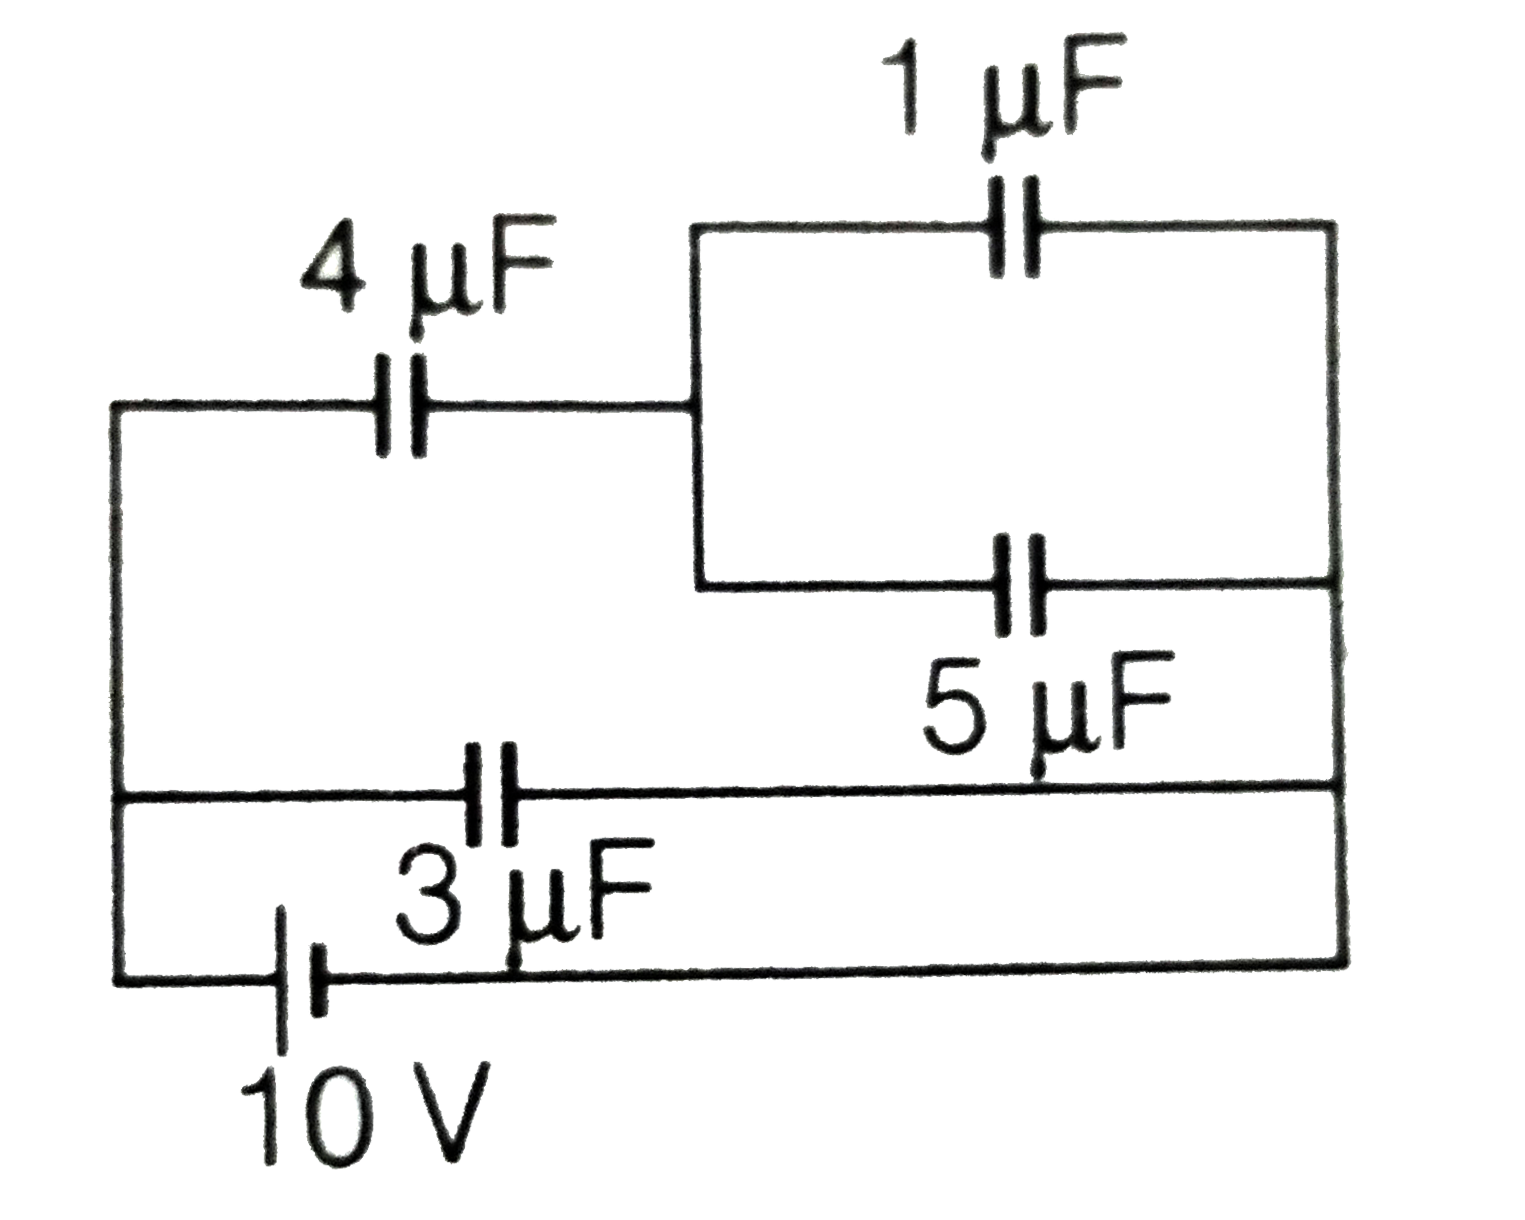 The charge on 4muF capacitor in the given circuit (in muC) is